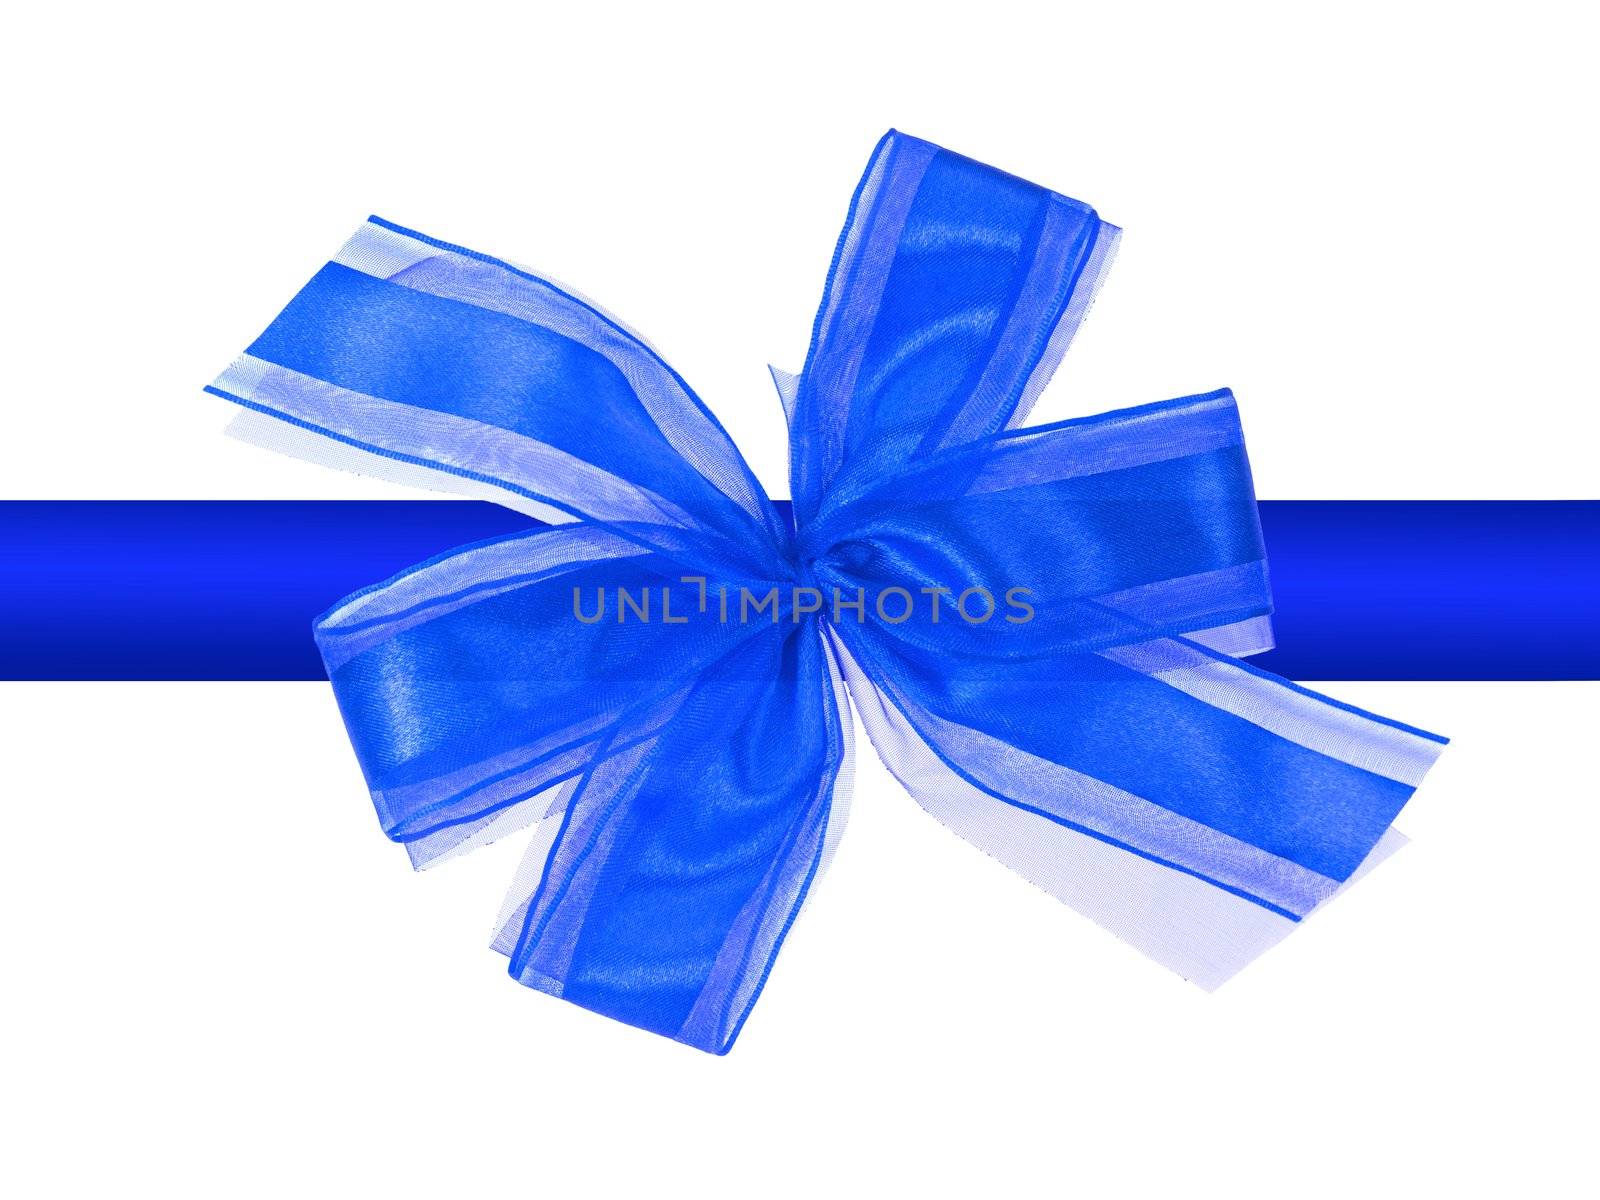 Christmas gift wrapping isolated against a white background